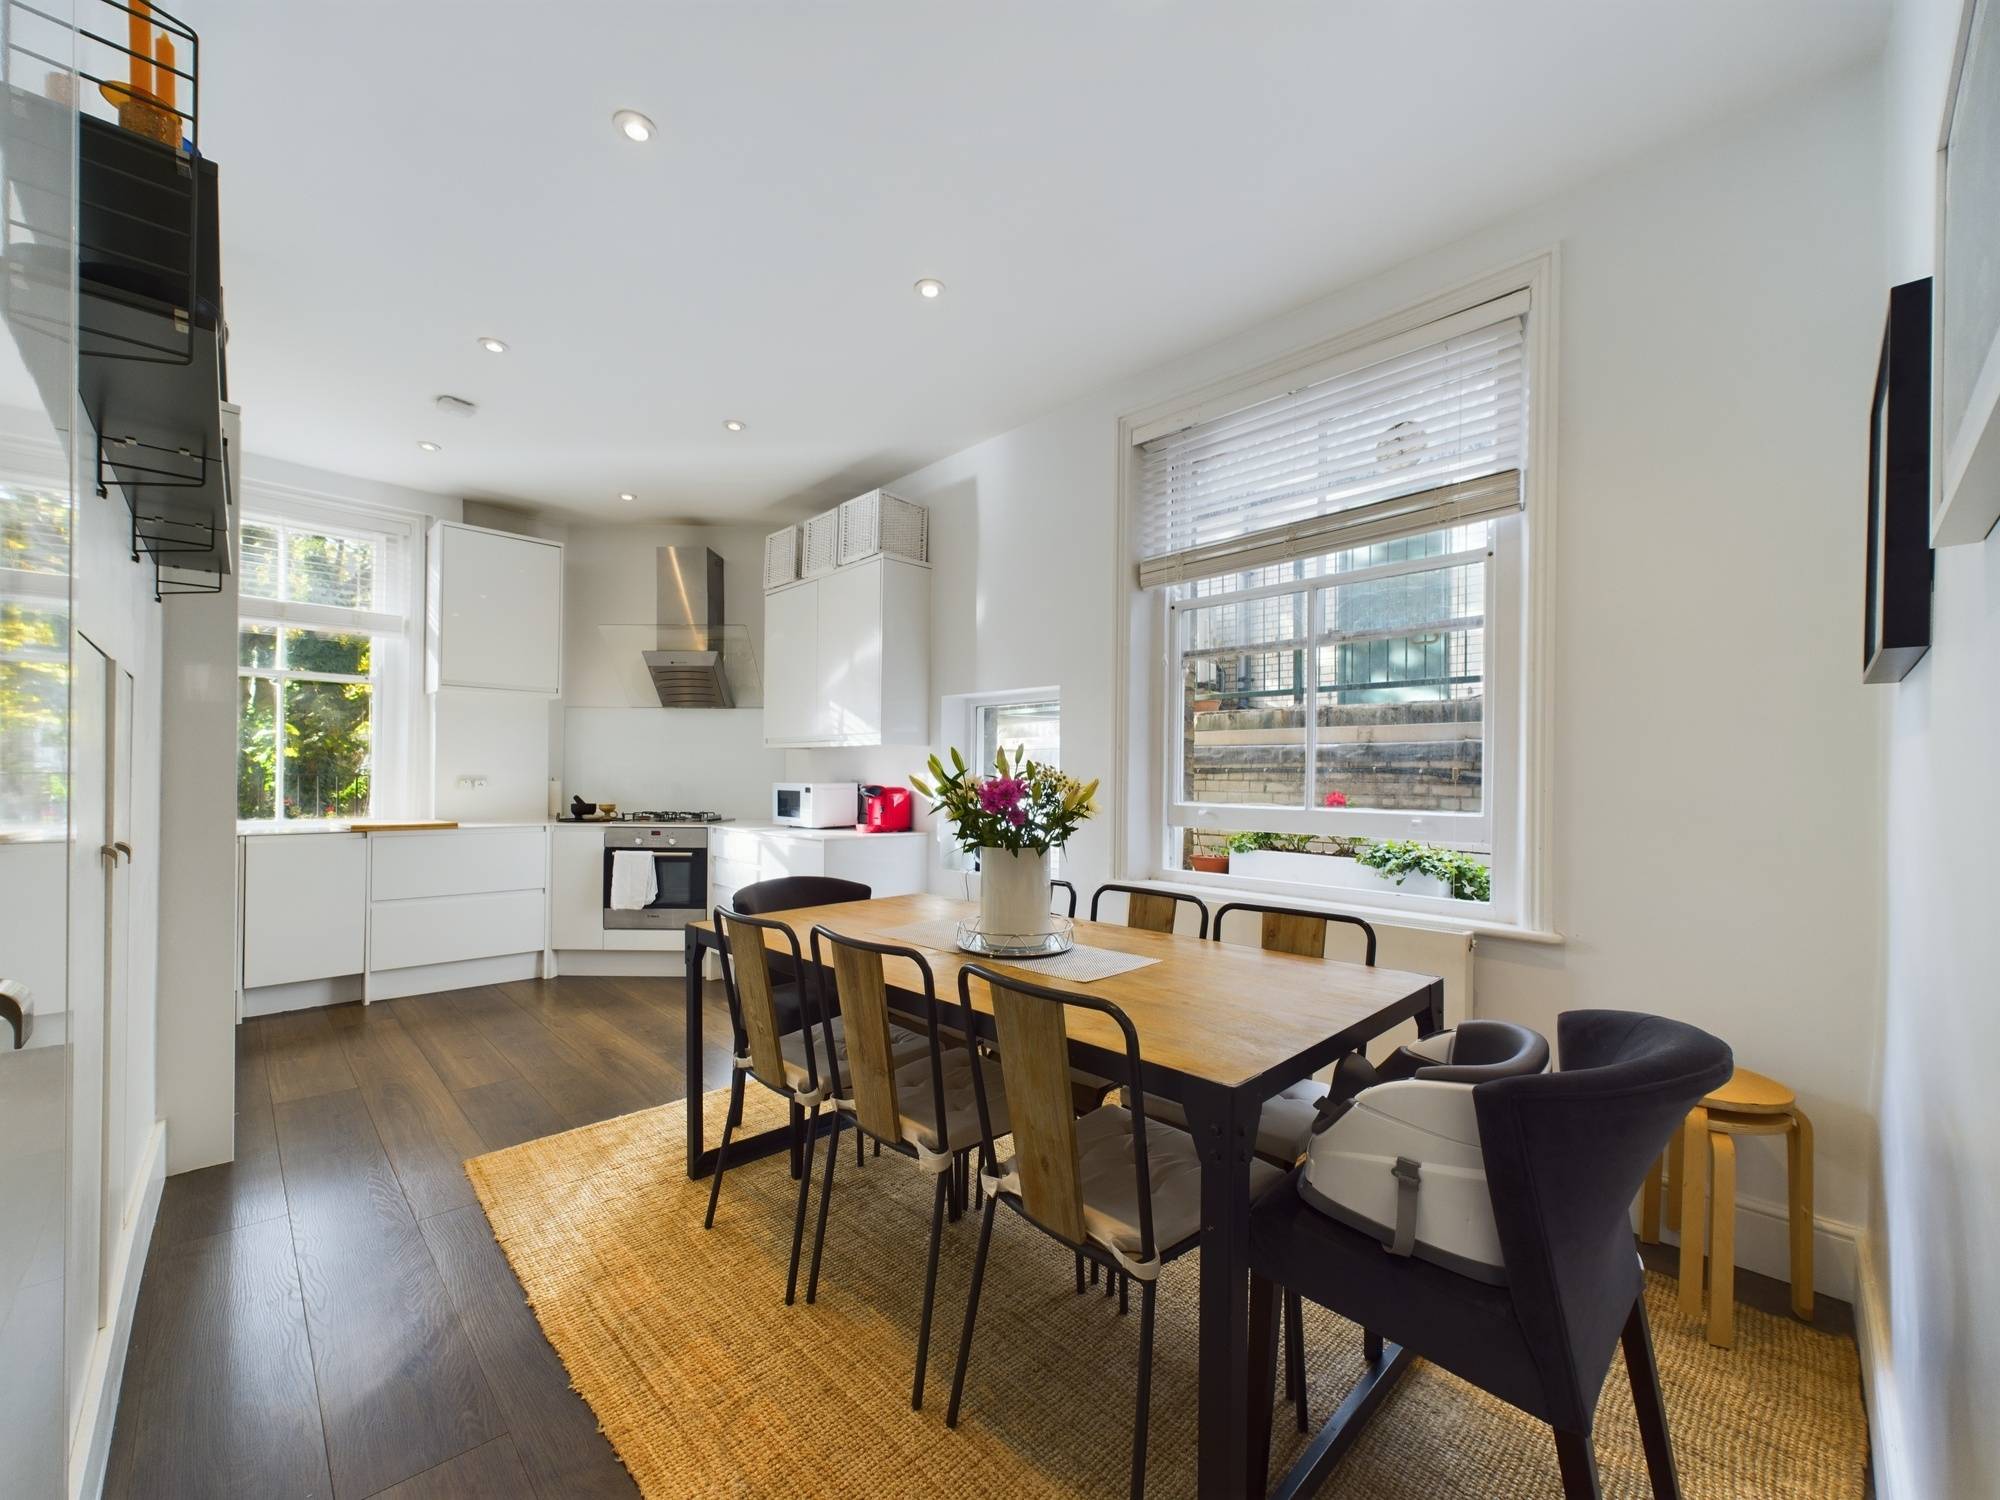 Charming and spacious 1-bedroom apartment in fashionable Maida Vale